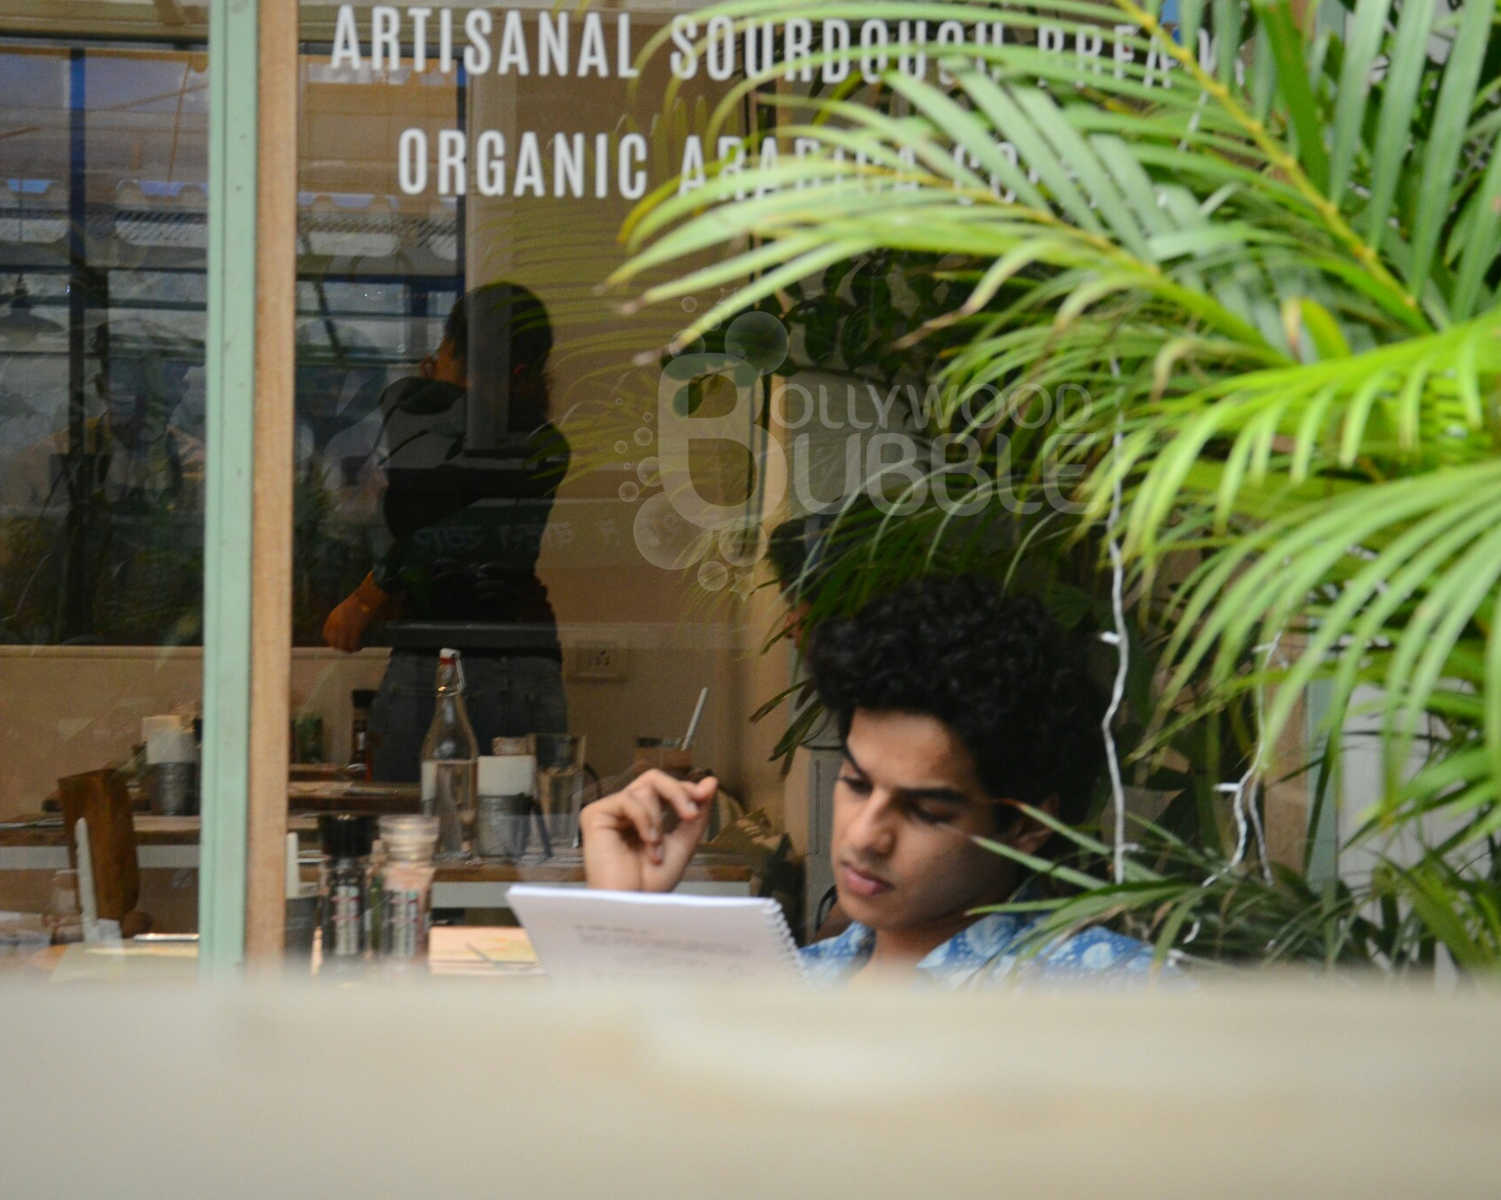 ishaan khatter spotted bandra